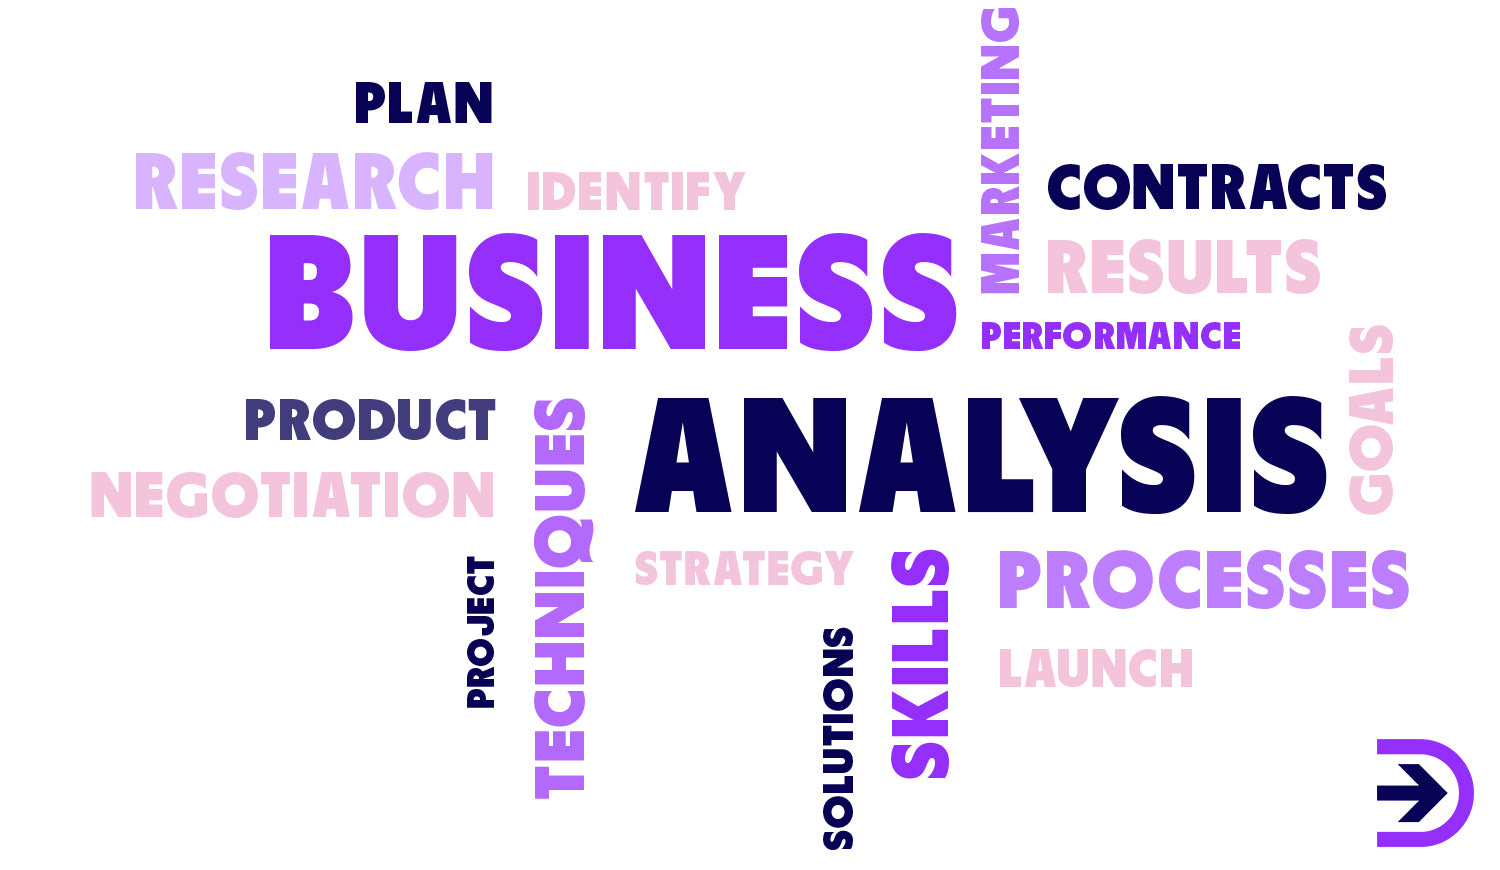 Research, planning and analysis of your product, market and strategy is essential when starting your business.